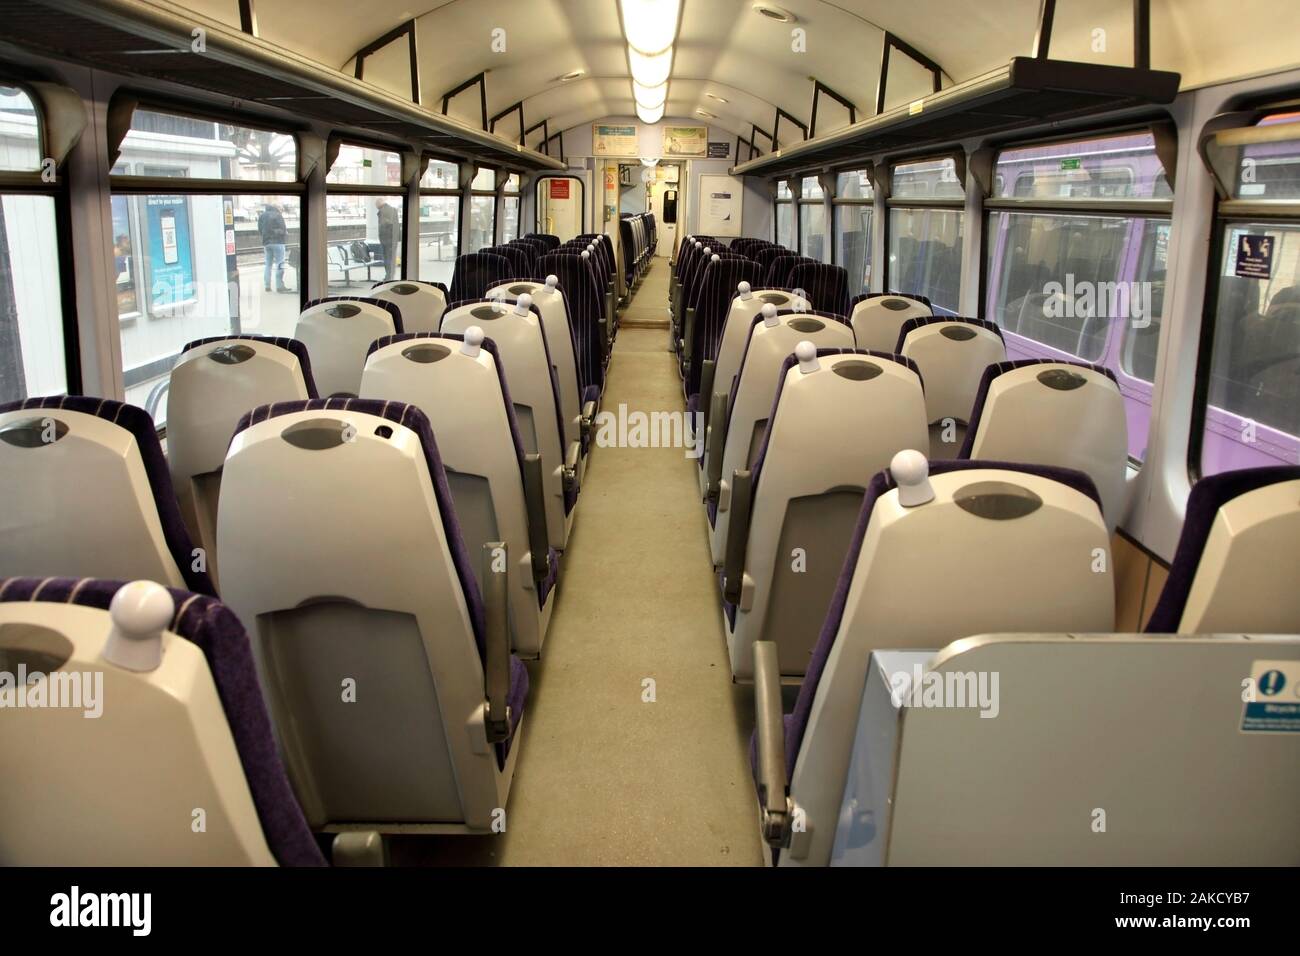 Interior of Northern Rail Class 144 'Pacer' diesel multiple unit train shortly before withdrawal from service in 2020. York, UK. Stock Photo